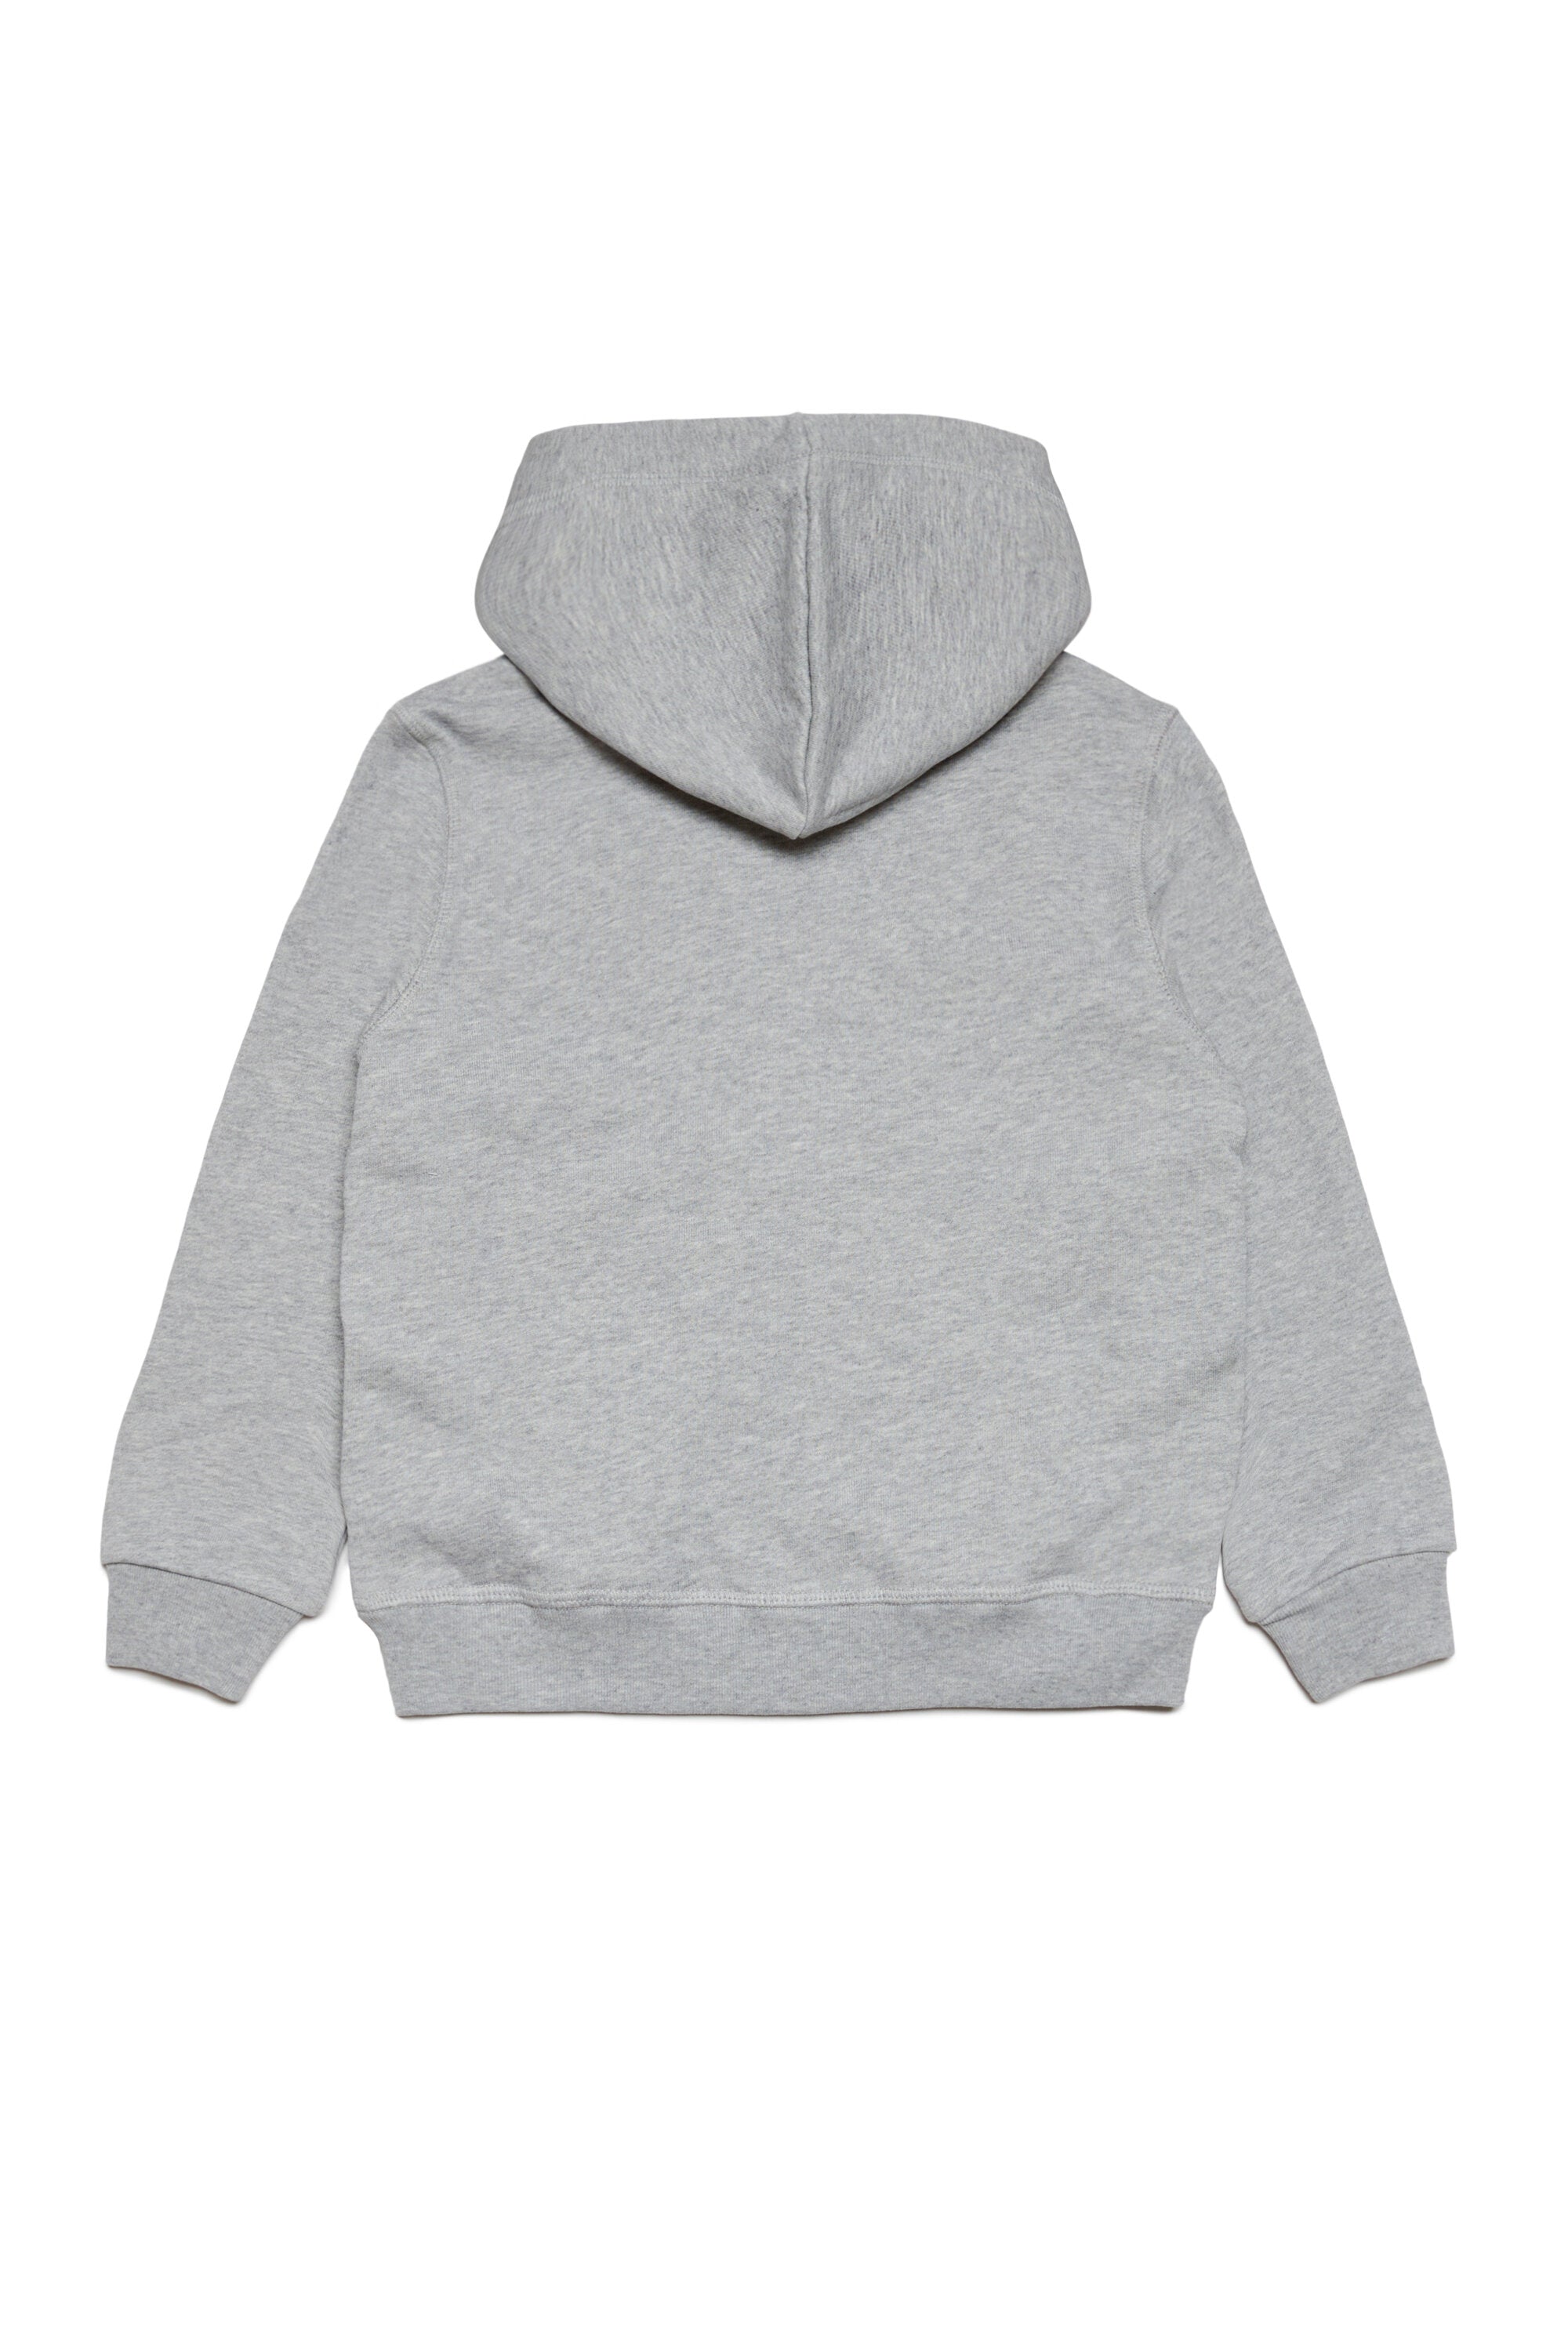 Cotton mélange loungewear hooded sweatshirt with zip and D2 logo